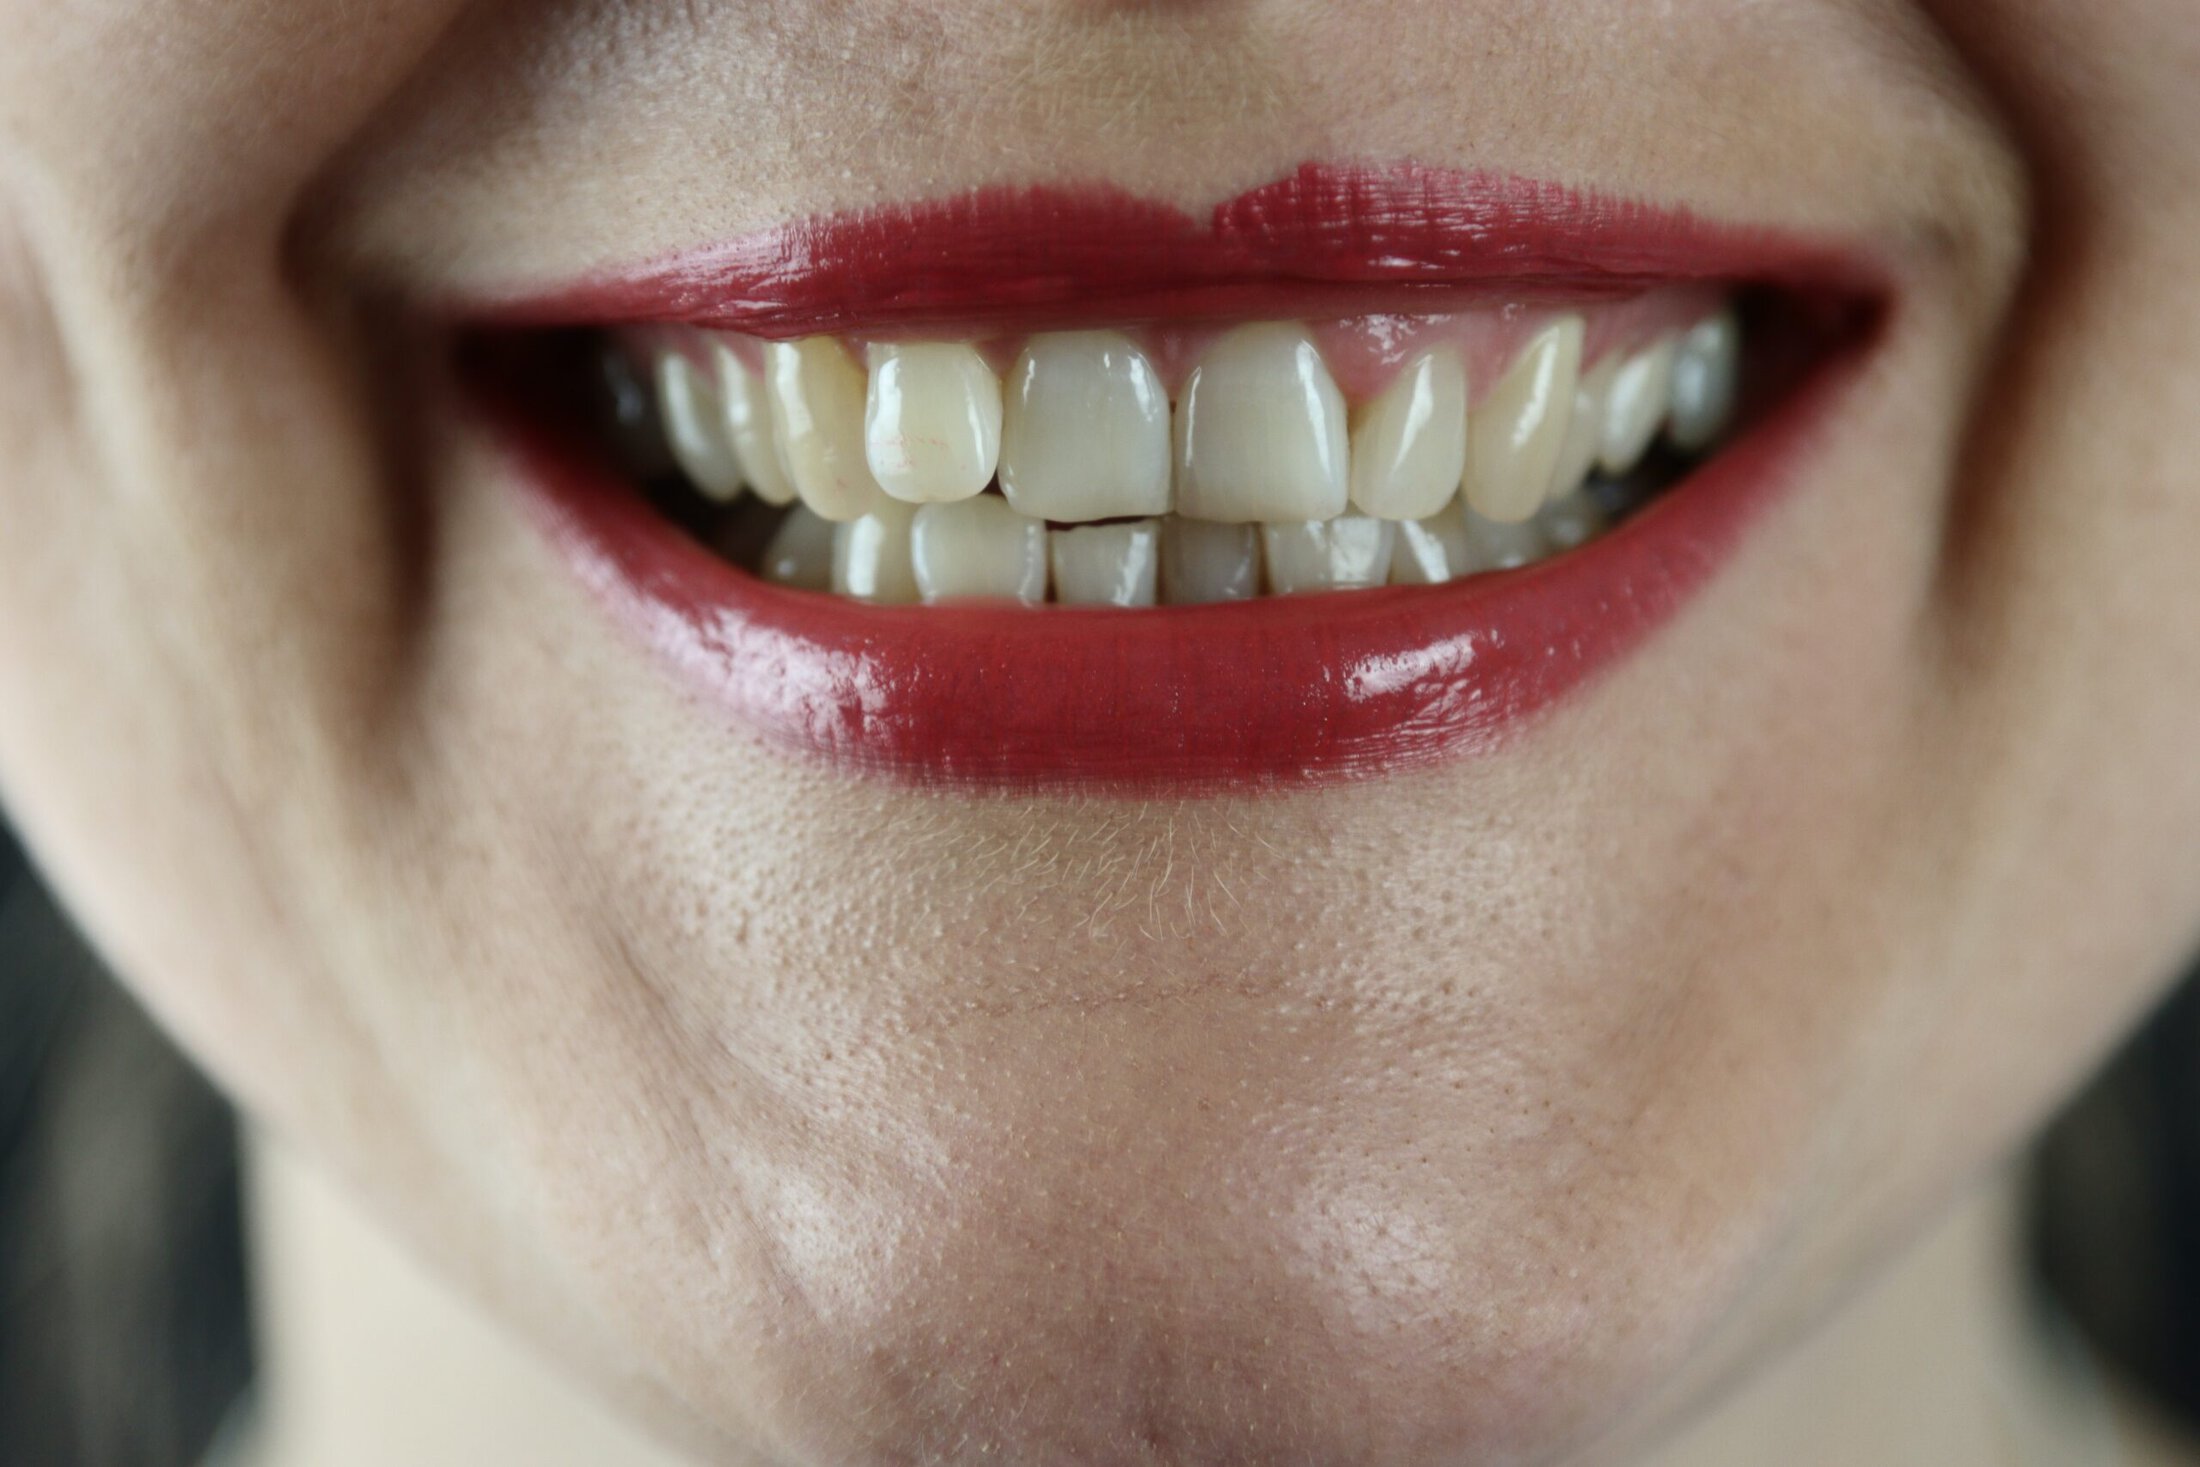 cosmetic dentistry patient model with crooked teeth and red lipstick